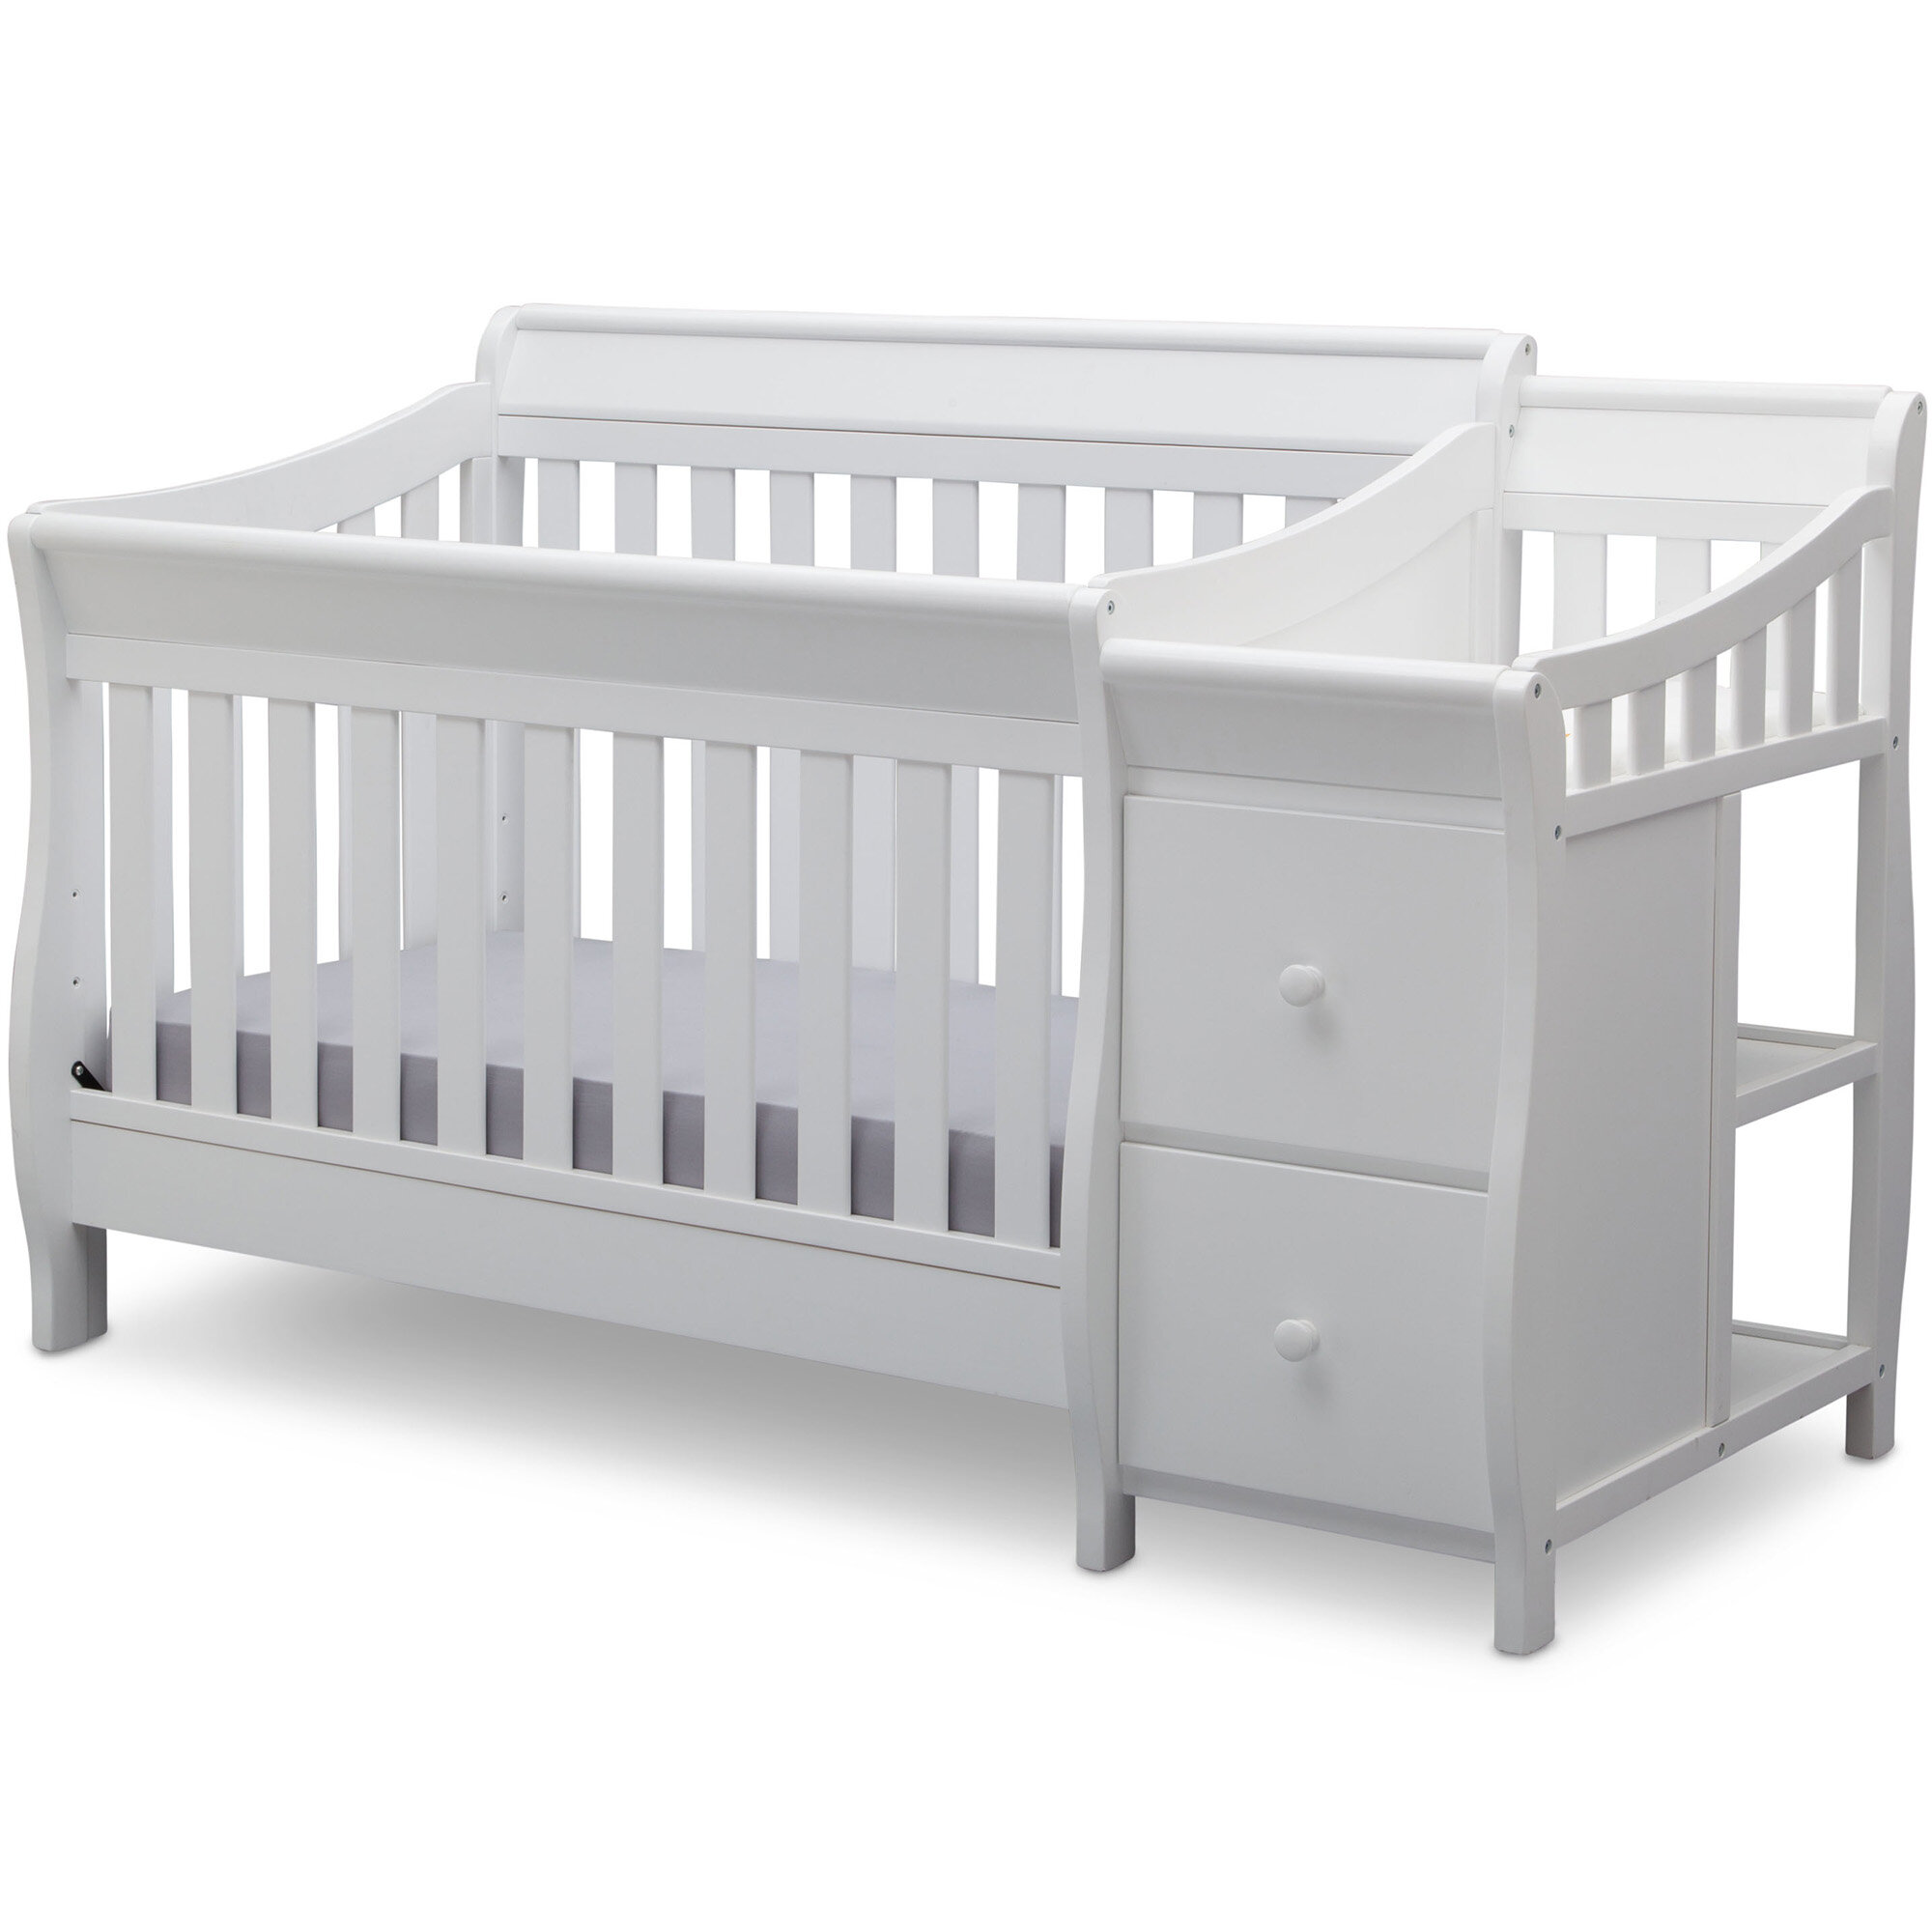 crib into daybed